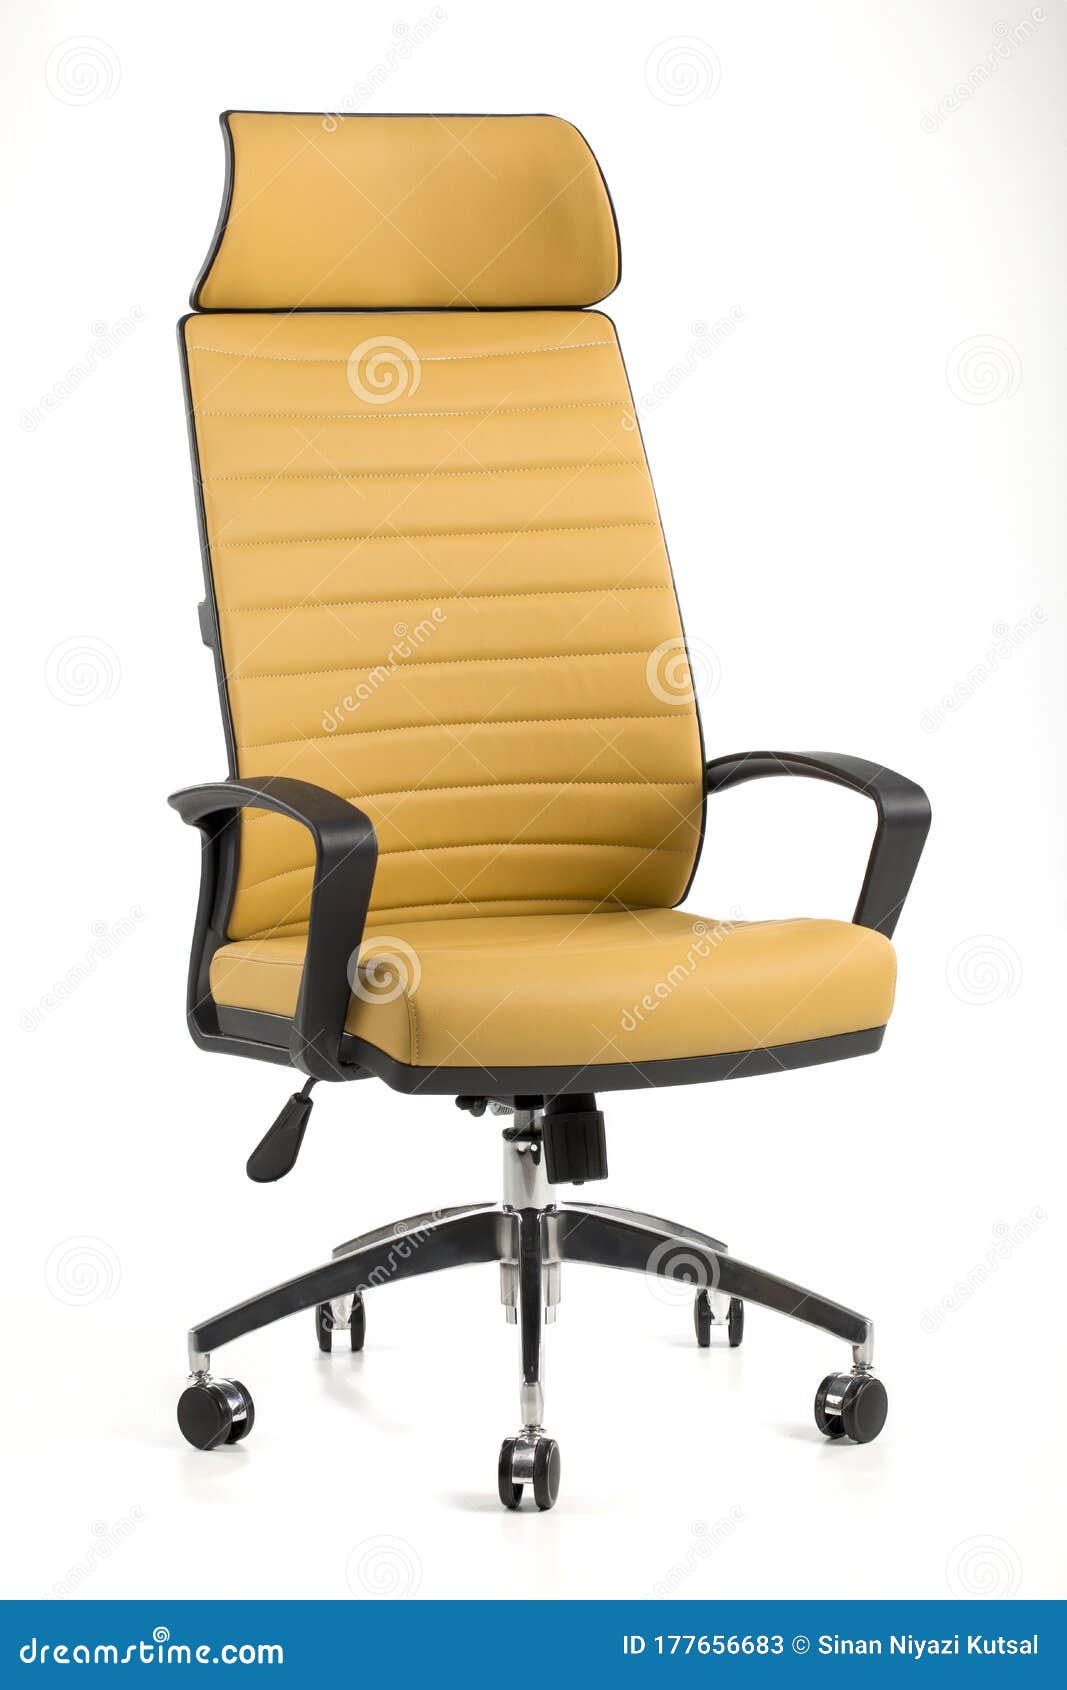 Yellow Executive Office Chair Stock Image Image of